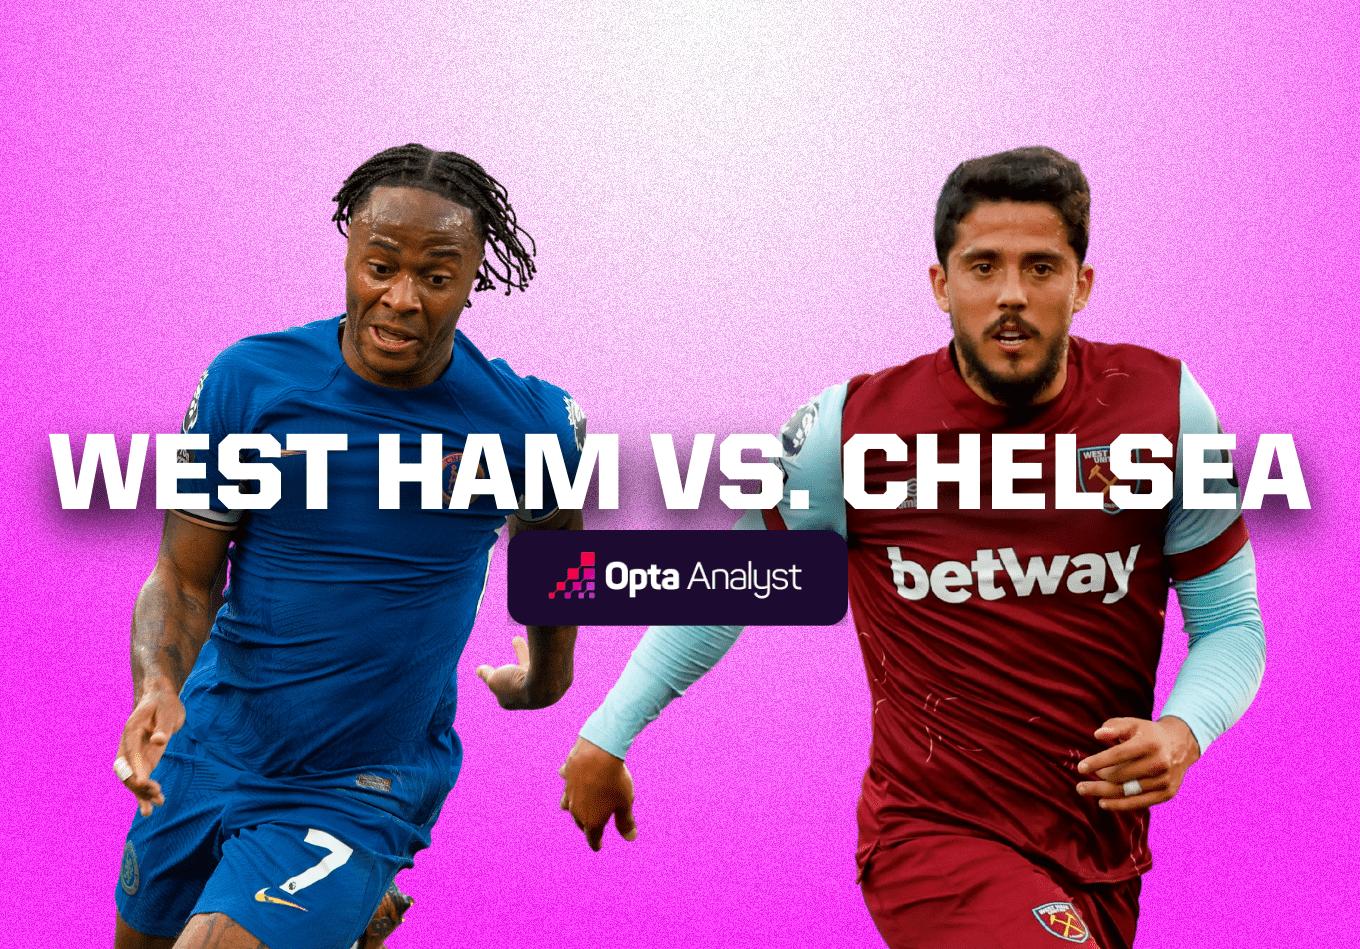 West Ham vs Chelsea: Prediction and Preview